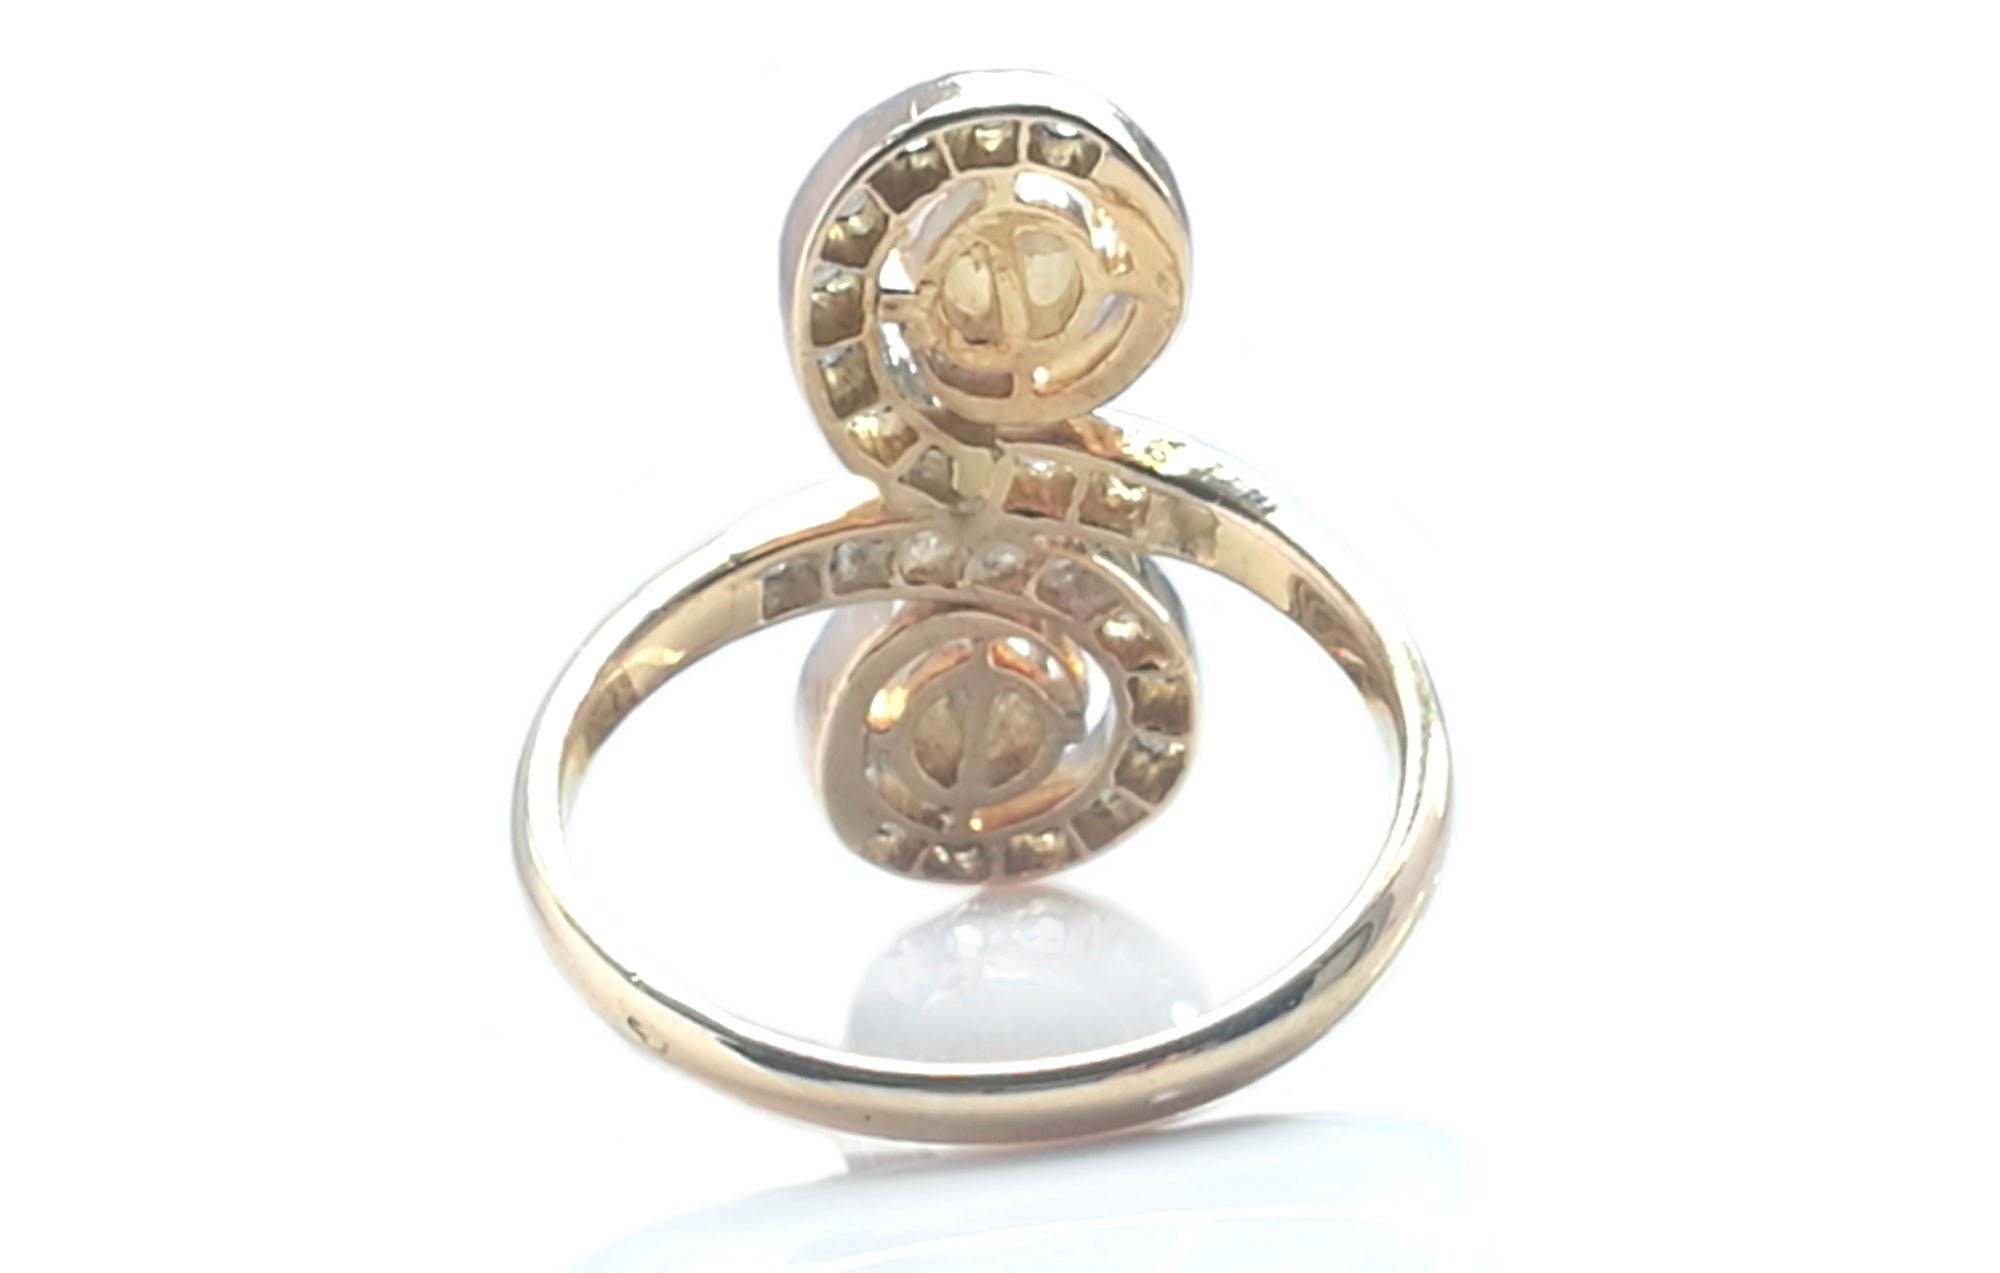 Antique French Belle Epoque Twin Pearl & Diamond Ring in 18k Yellow Gold